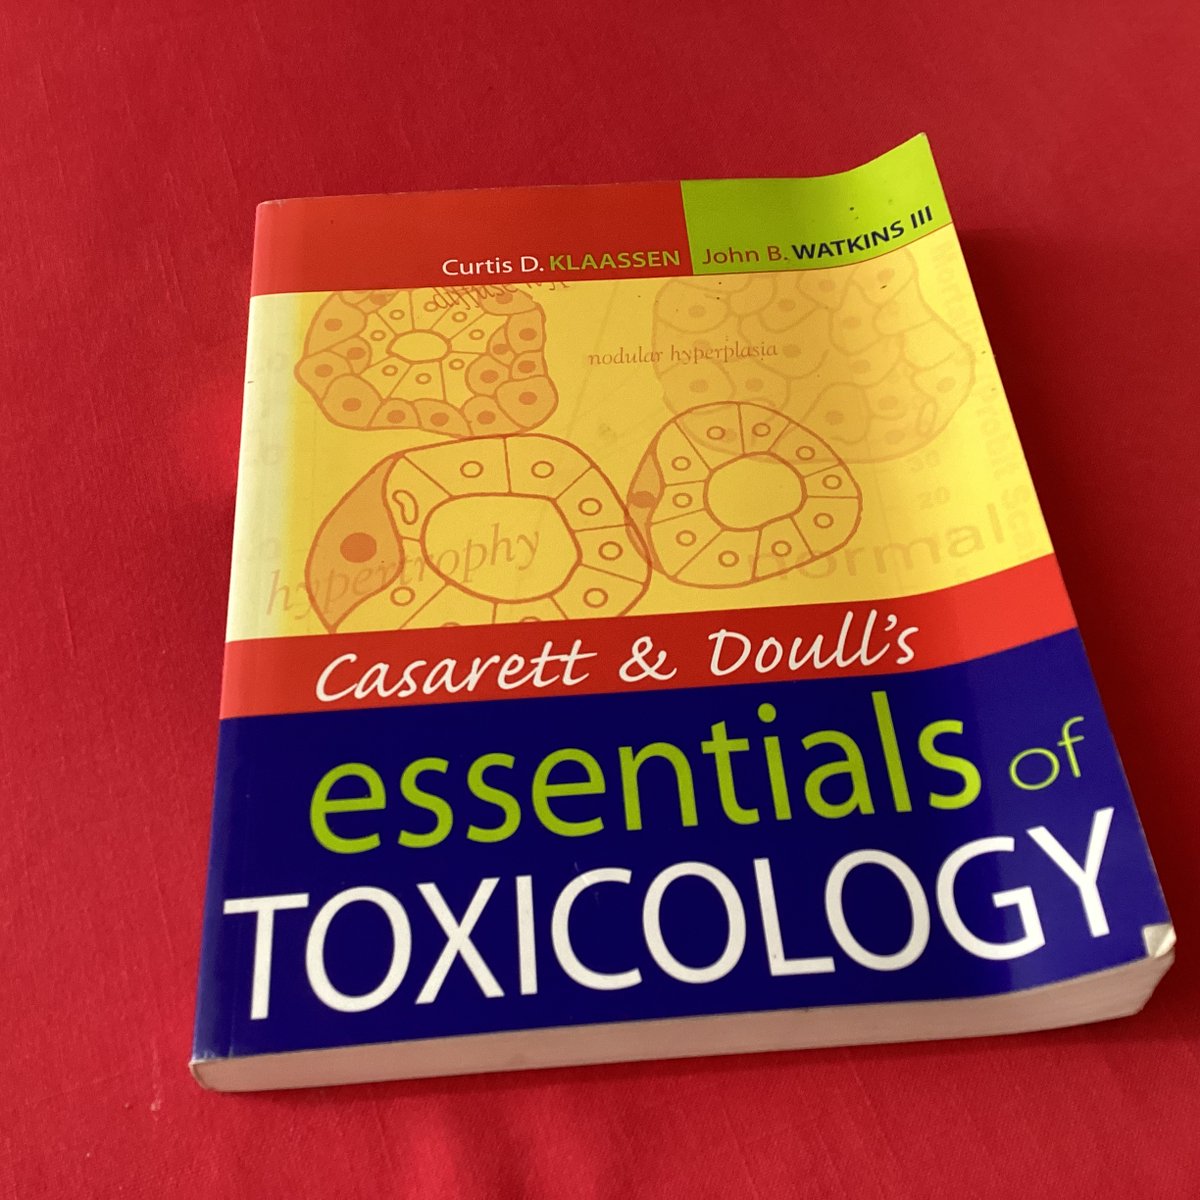 CASARETT AND DOULL'S ESSENTIALS OF TOXICOLOGY (Softback) trademe.co.nz/a/marketplace/…